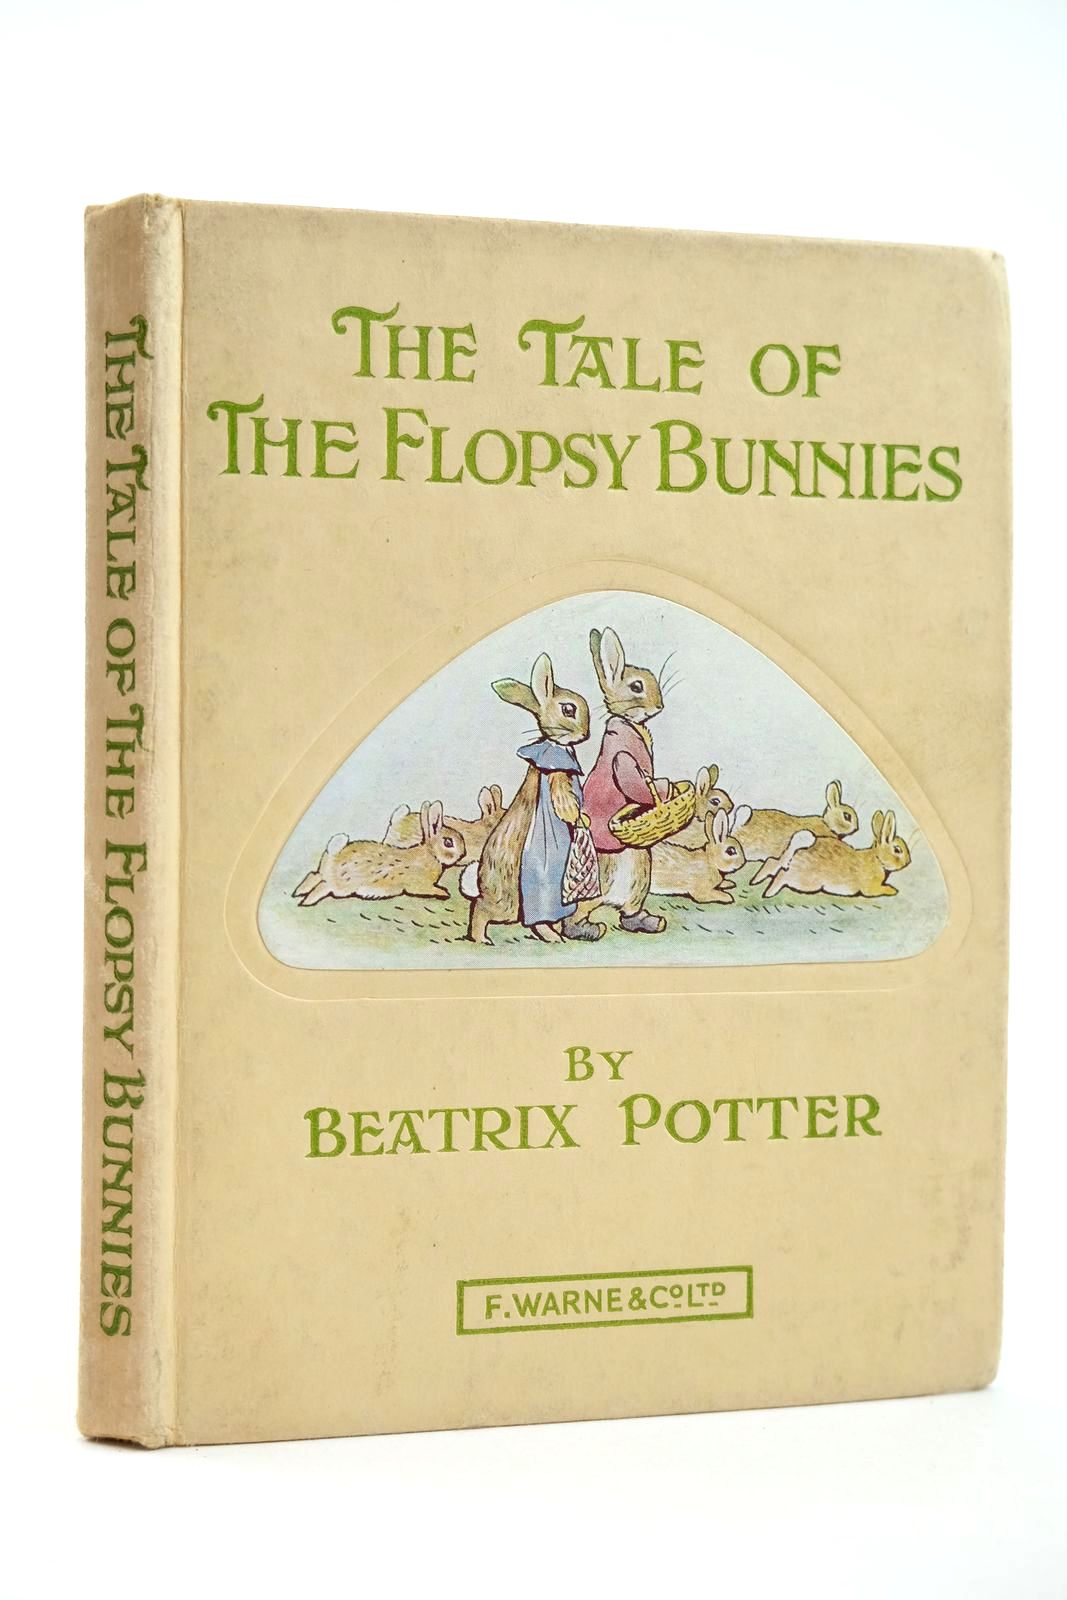 Photo of THE TALE OF THE FLOPSY BUNNIES written by Potter, Beatrix illustrated by Potter, Beatrix published by Frederick Warne & Co Ltd. (STOCK CODE: 2131892)  for sale by Stella & Rose's Books